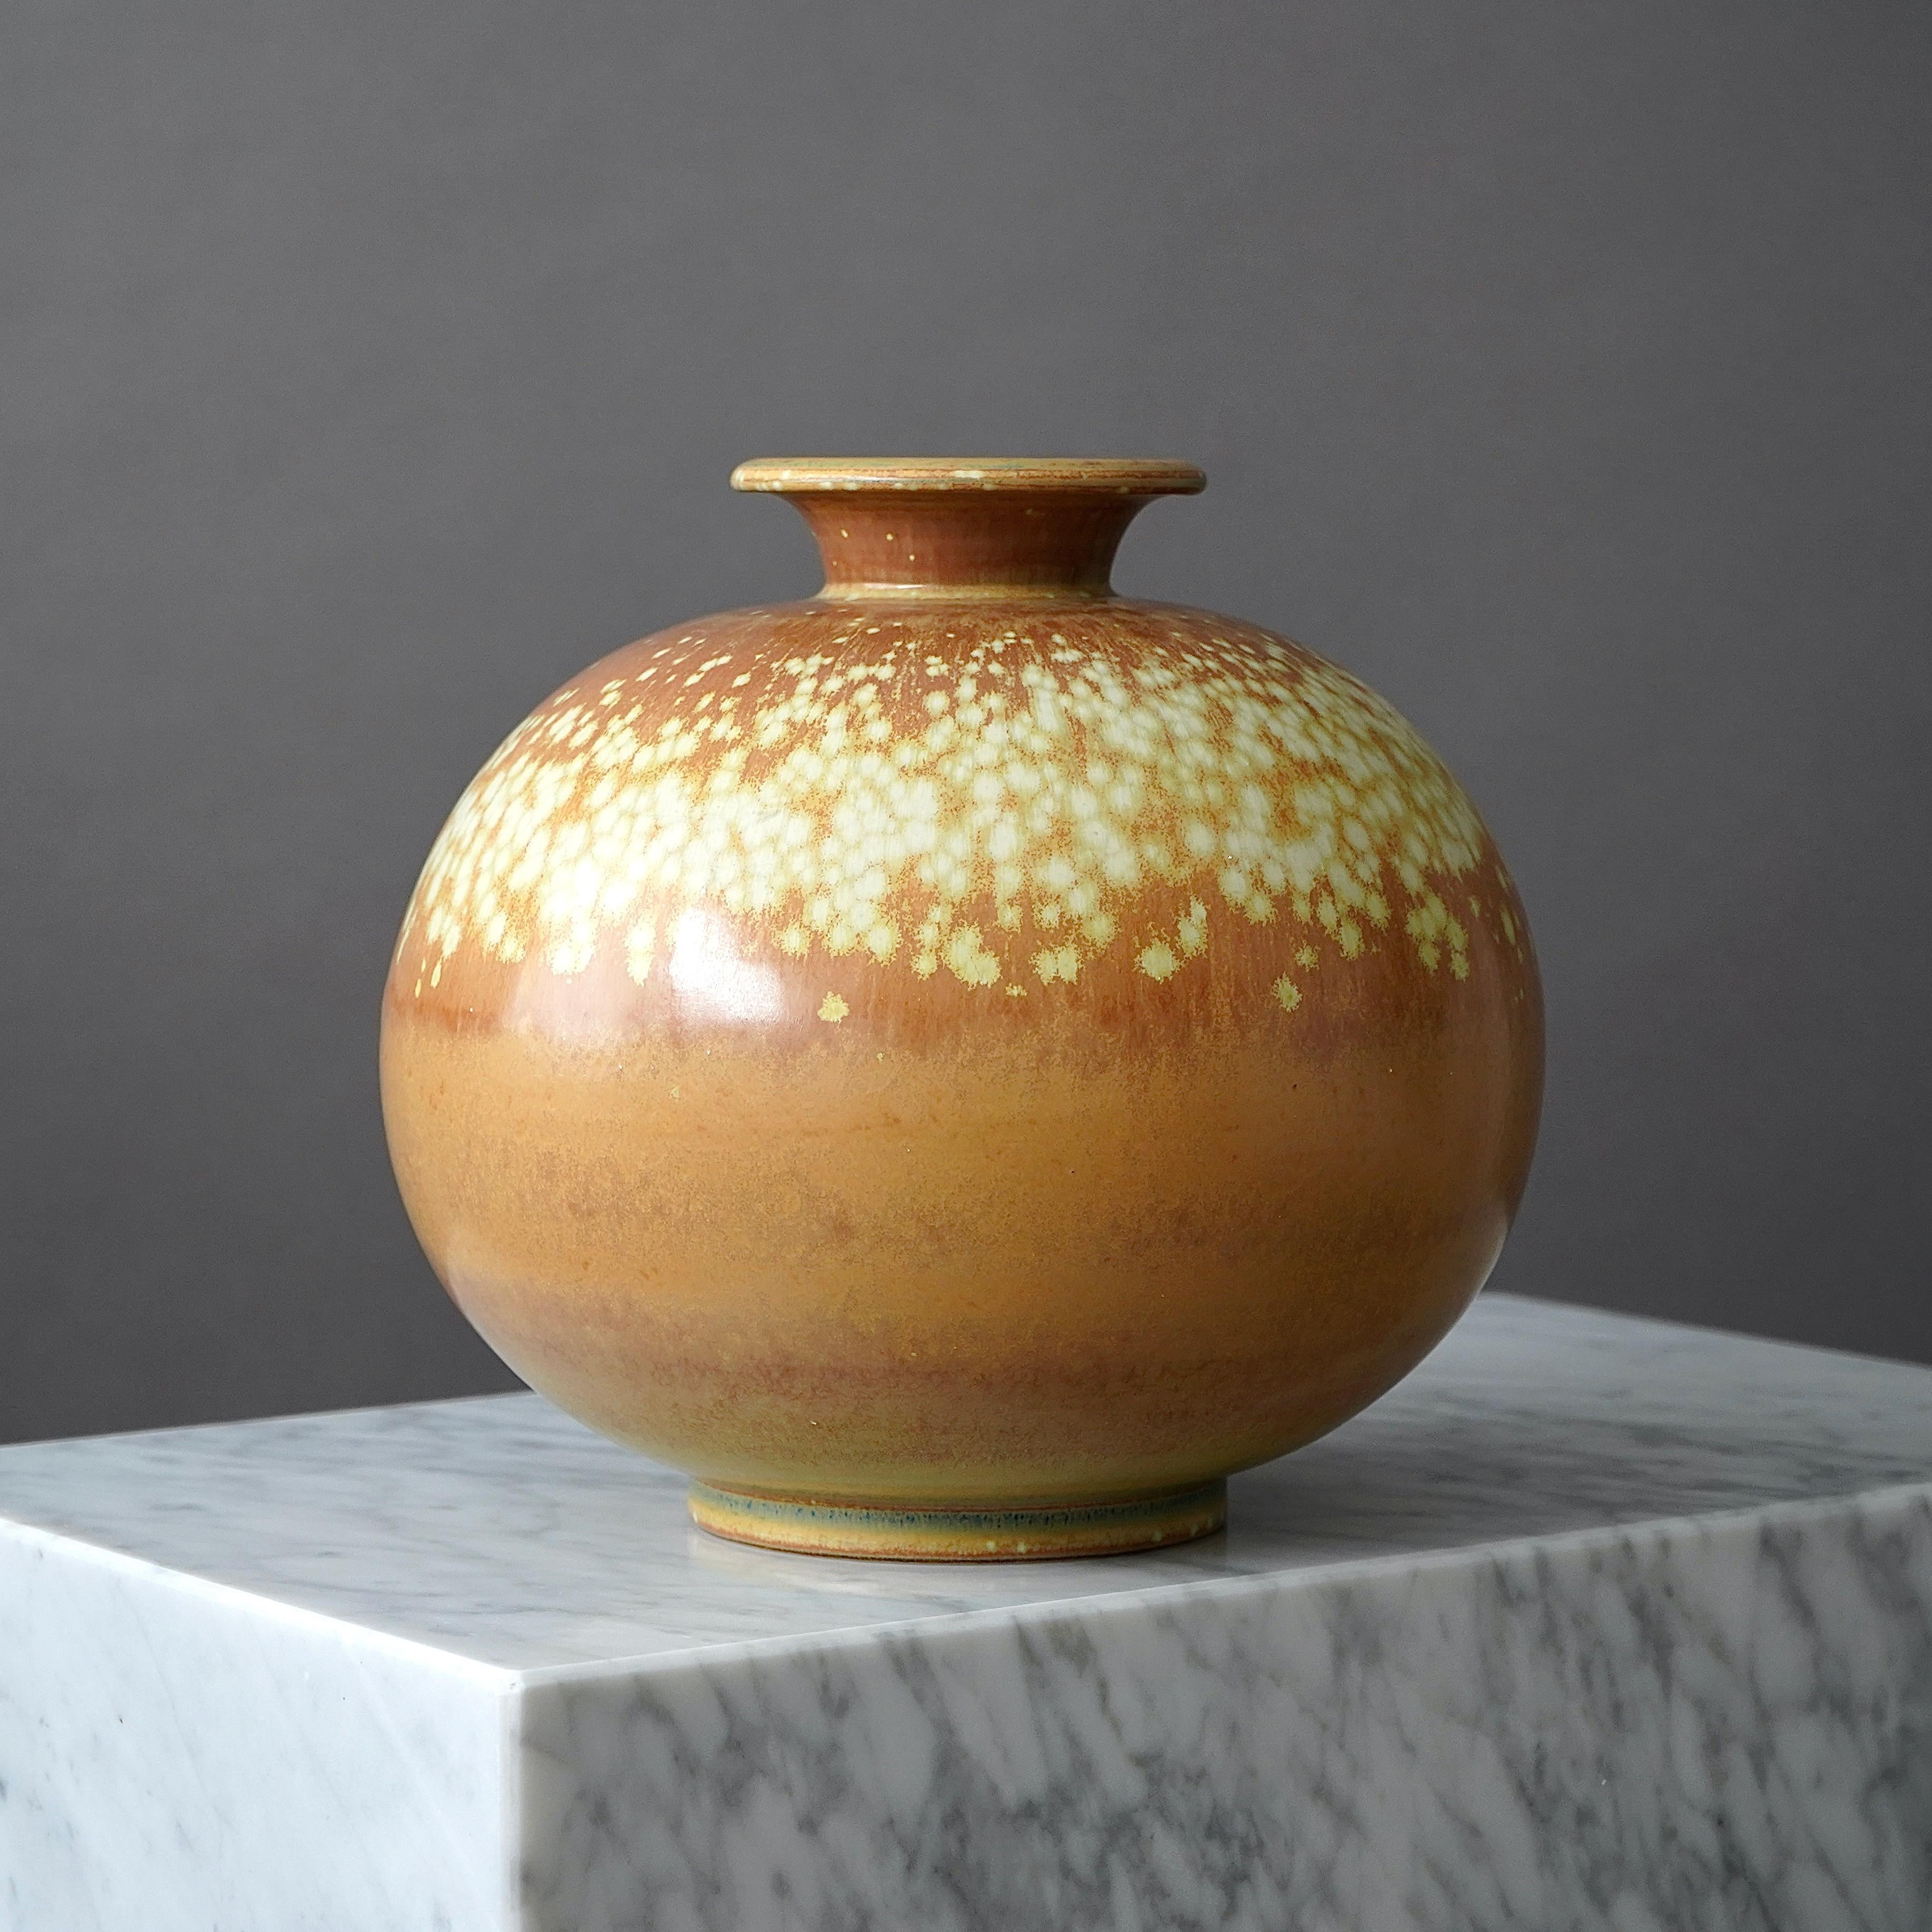 Ceramic Unique Large Stoneware Vase by Gunnar Nylund for Rorstrand, Sweden, 1940s For Sale